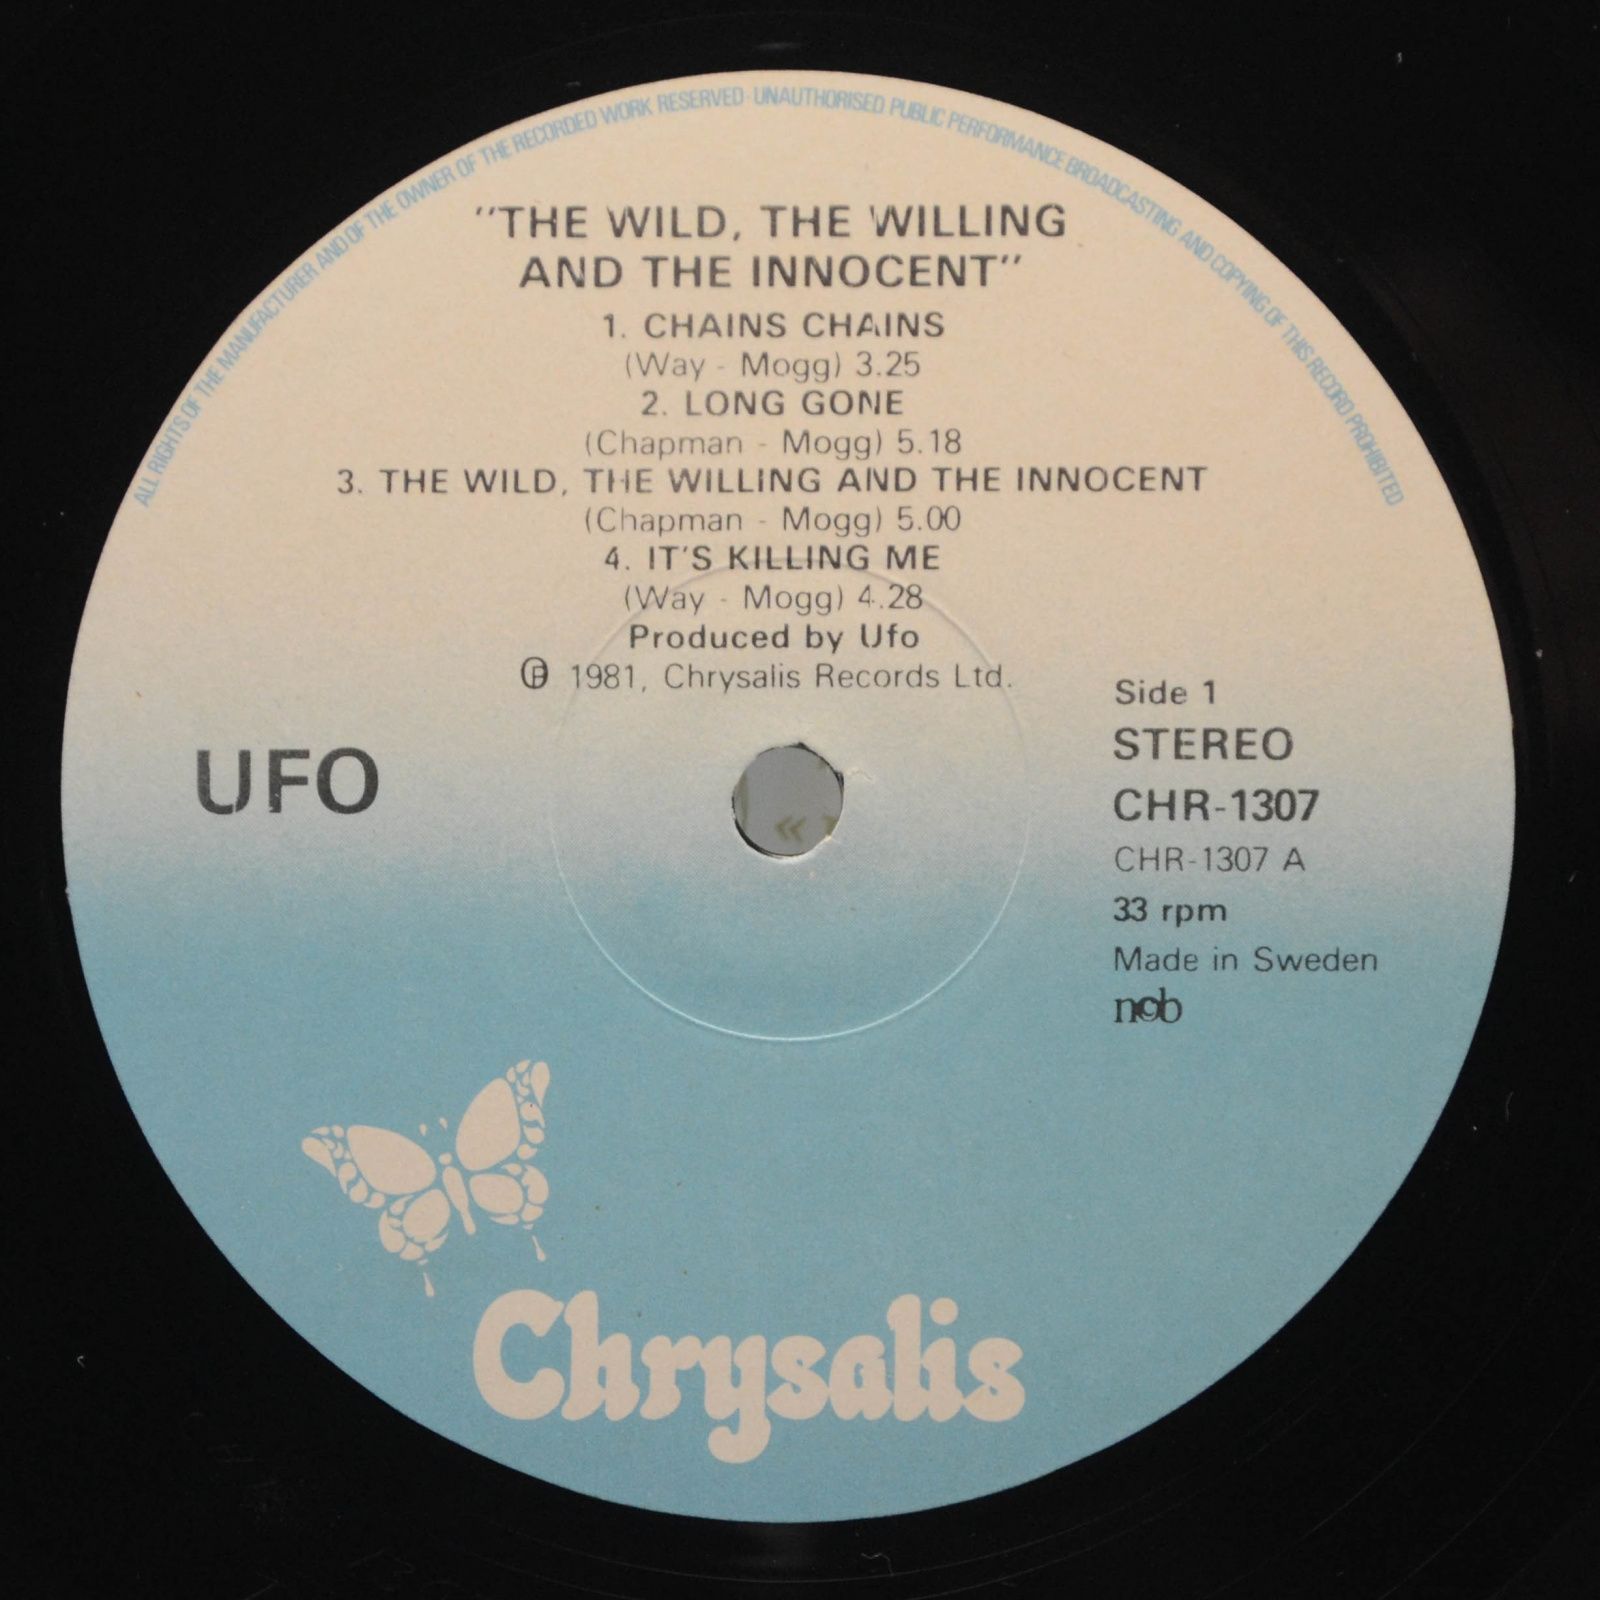 UFO — The Wild, The Willing And The Innocent, 1981